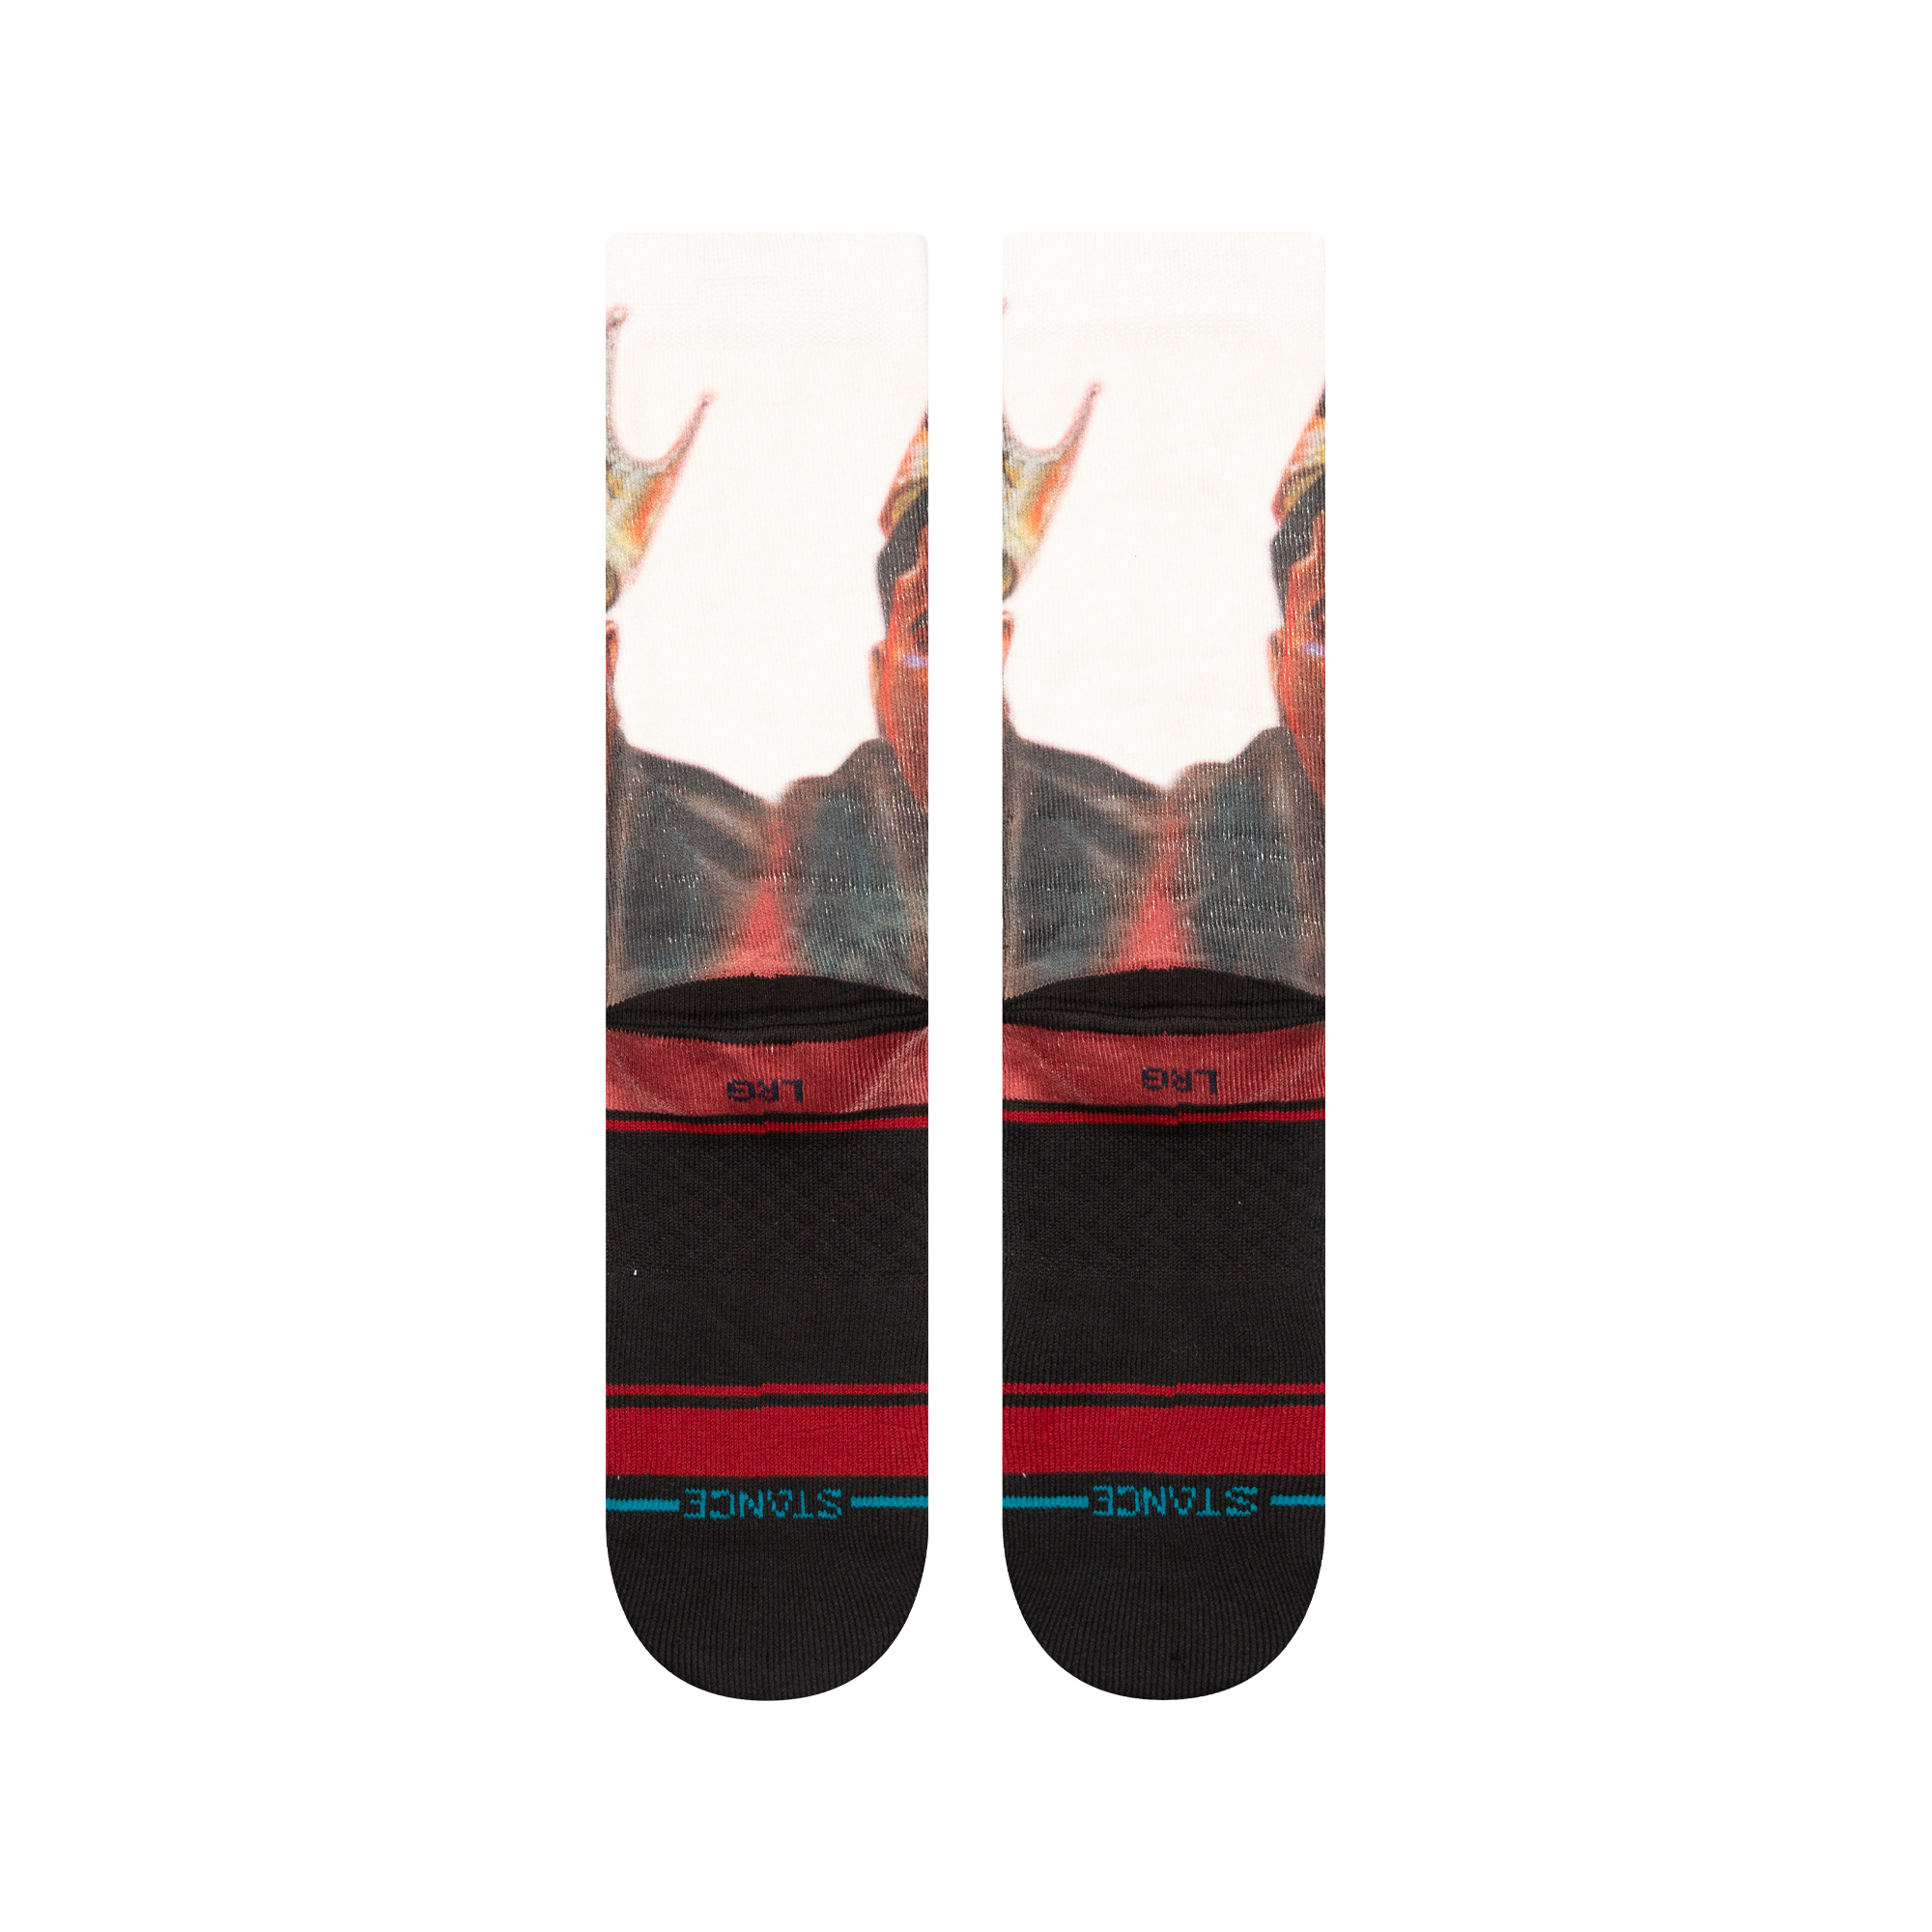 The Skys B.I.G. Limit Notorious Socks Crew | Stance Stance Poly X